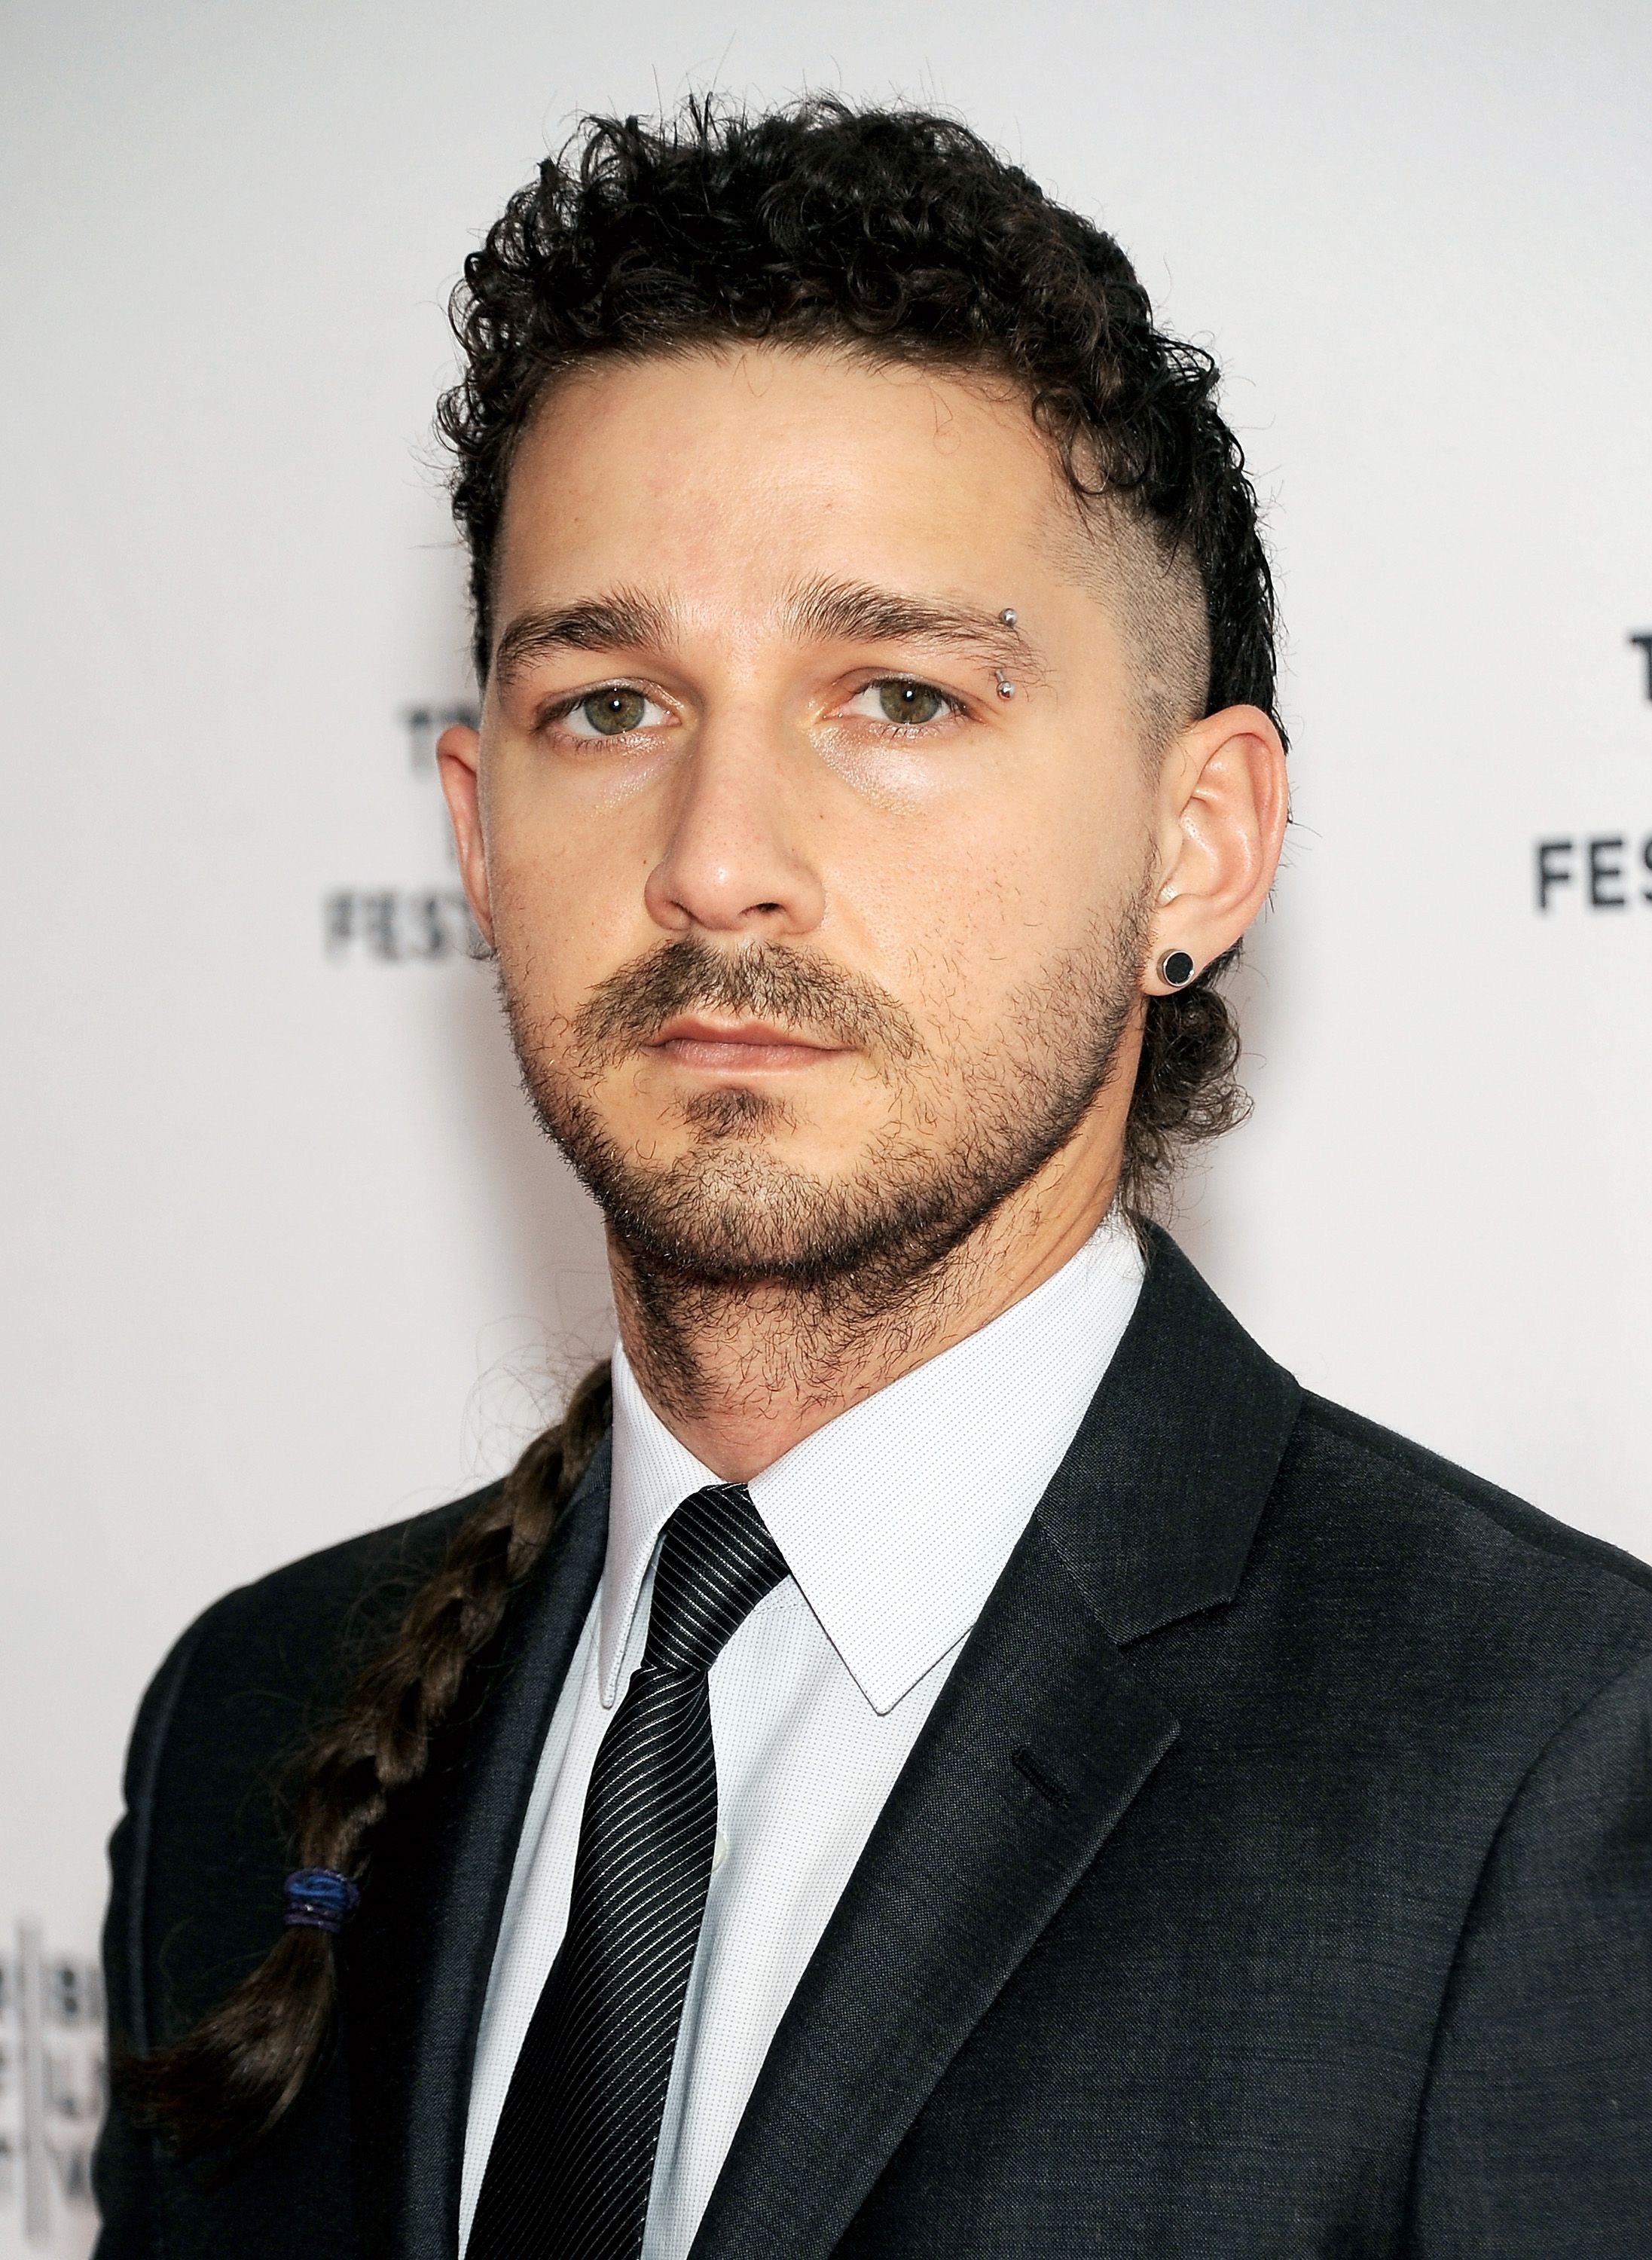 Shia Labeouf Has Been Arrested Again